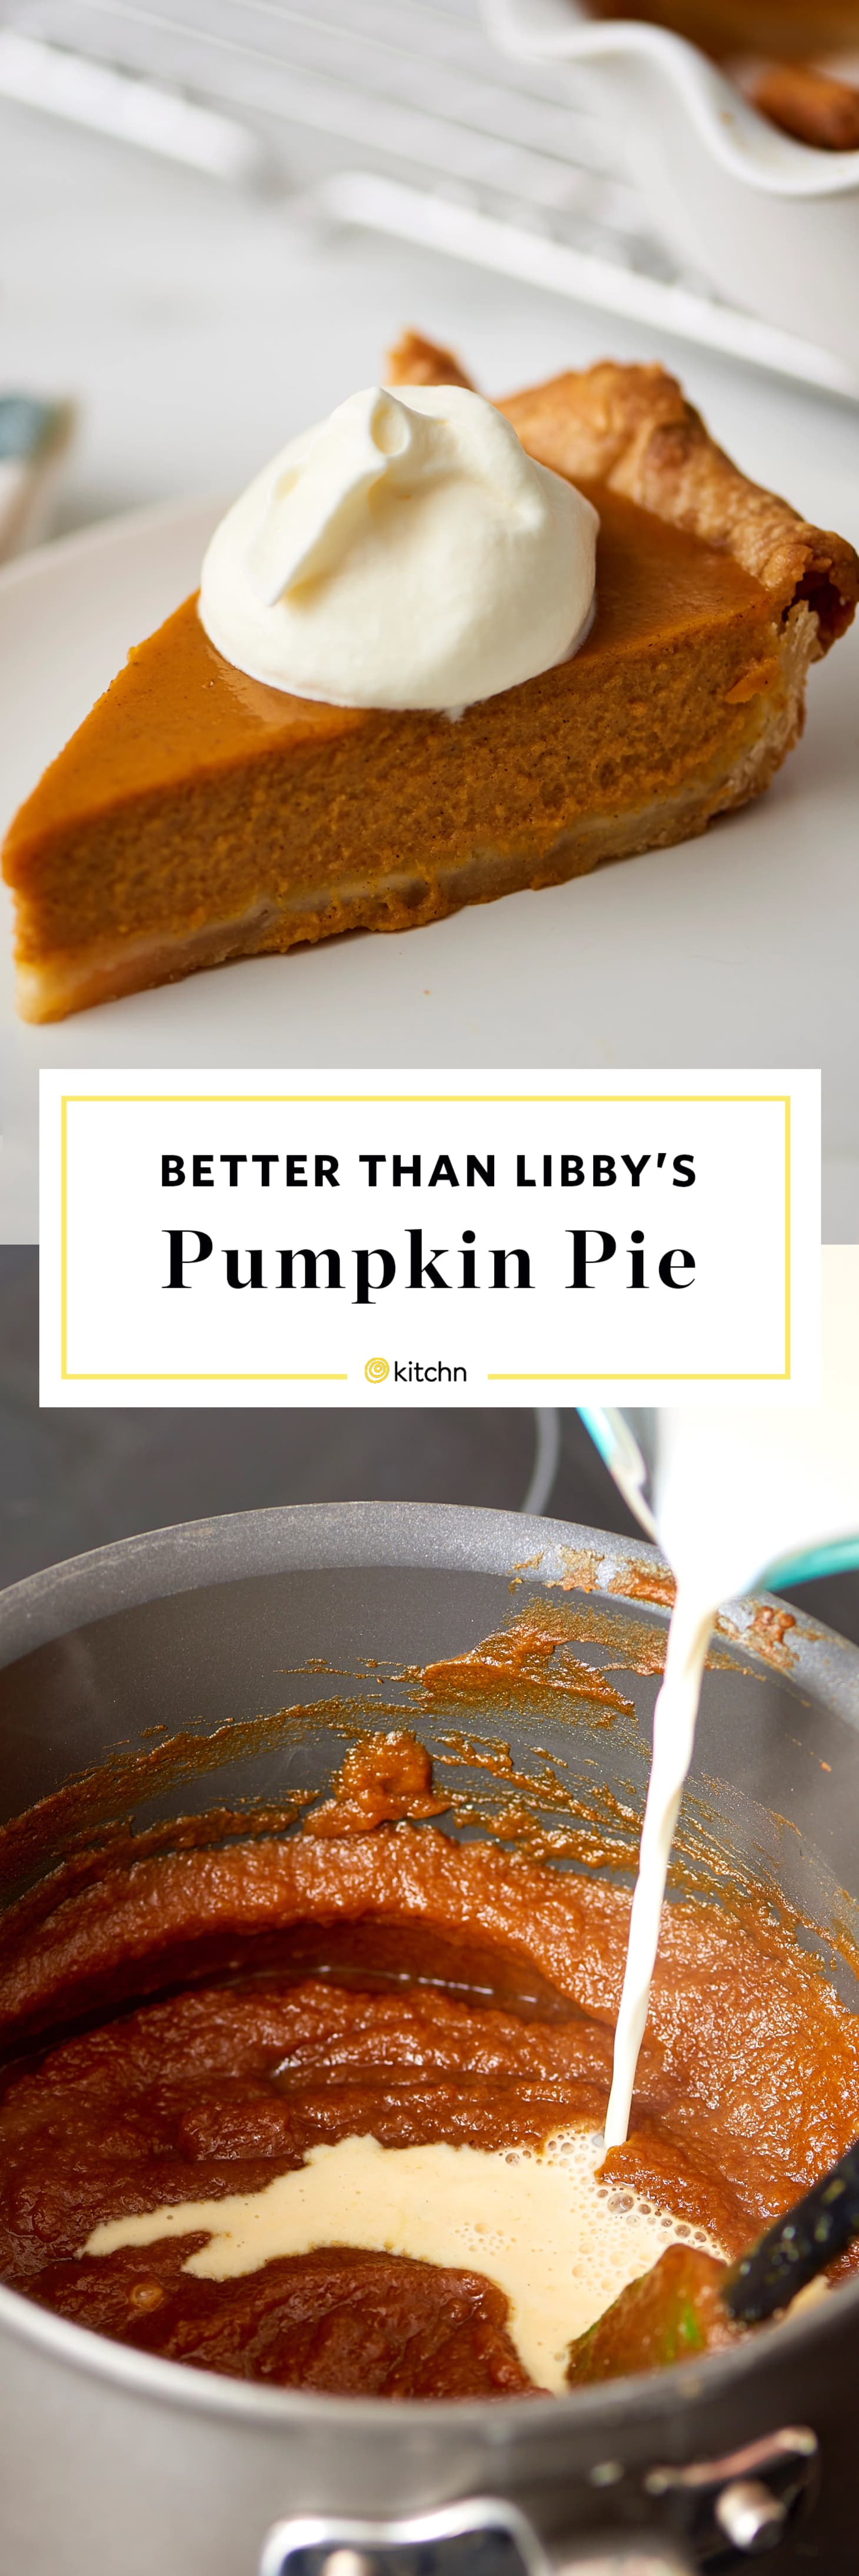 How to Make Homemade Pumpkin Pie from Scratch | Kitchn